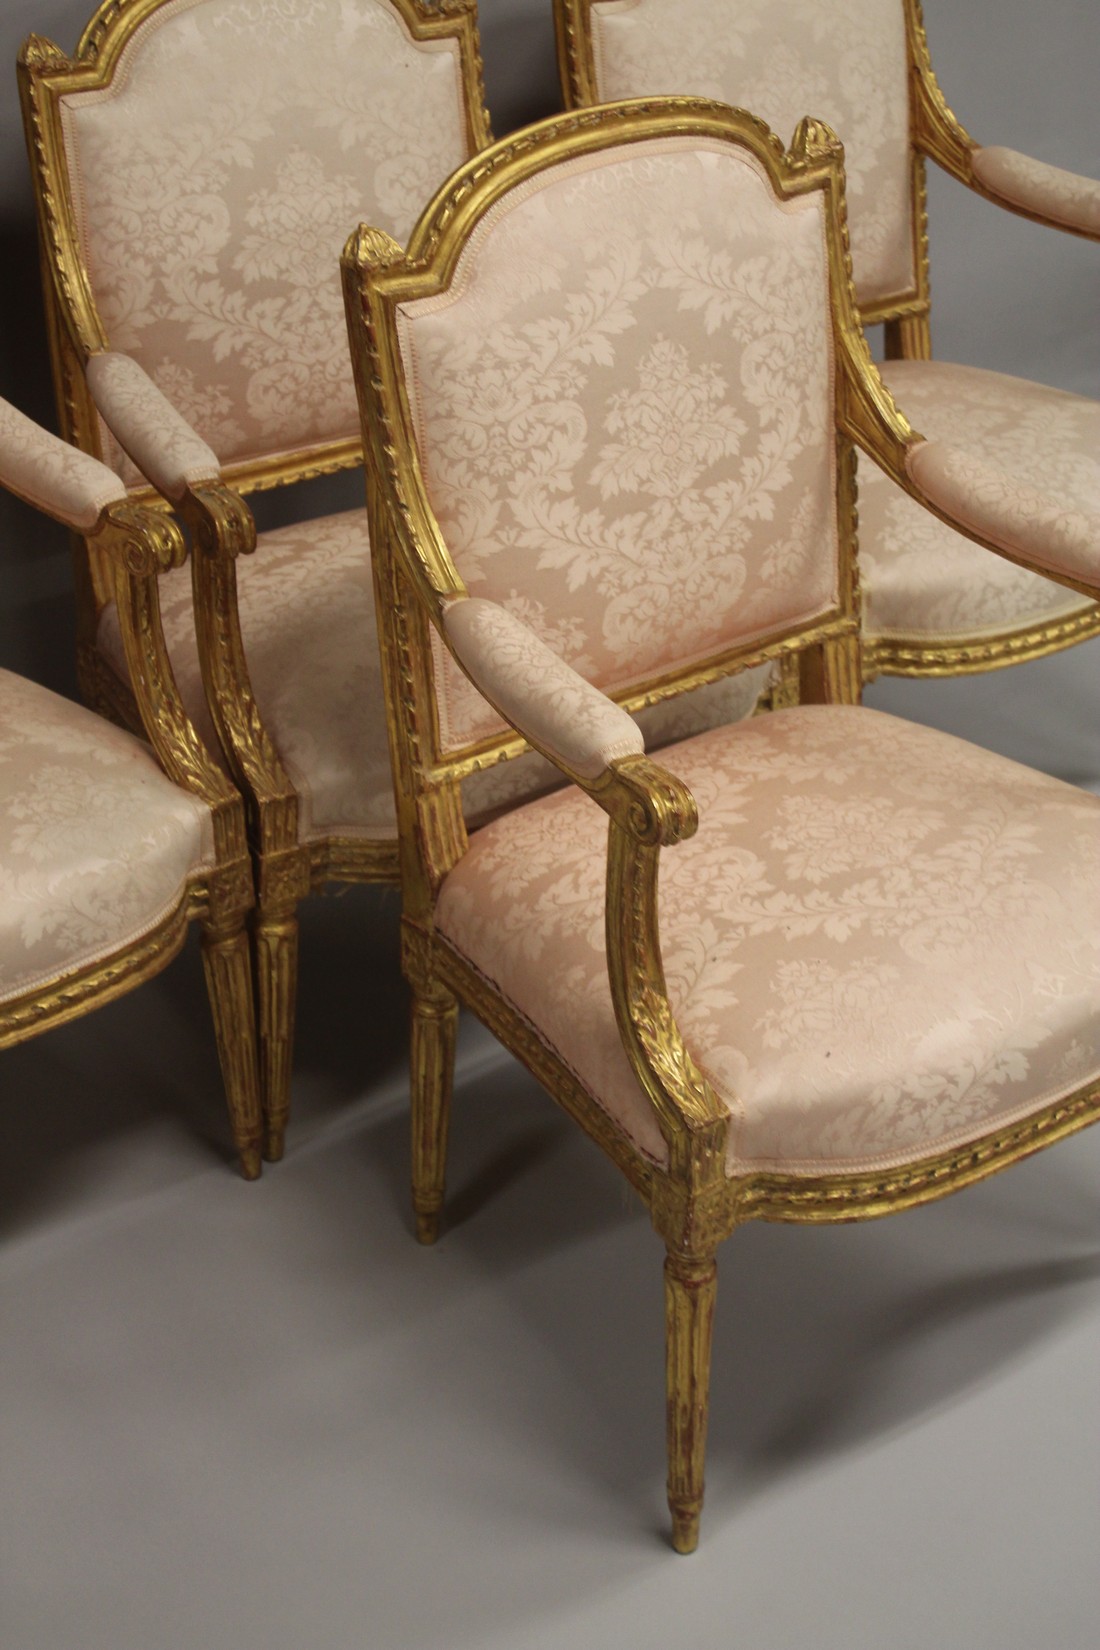 A VERY GOOD SET OF FOUR 19TH CENTURY LOUIS XVITH DESIGN FAUTEUIL with satin backs, arms and seats, - Image 4 of 4